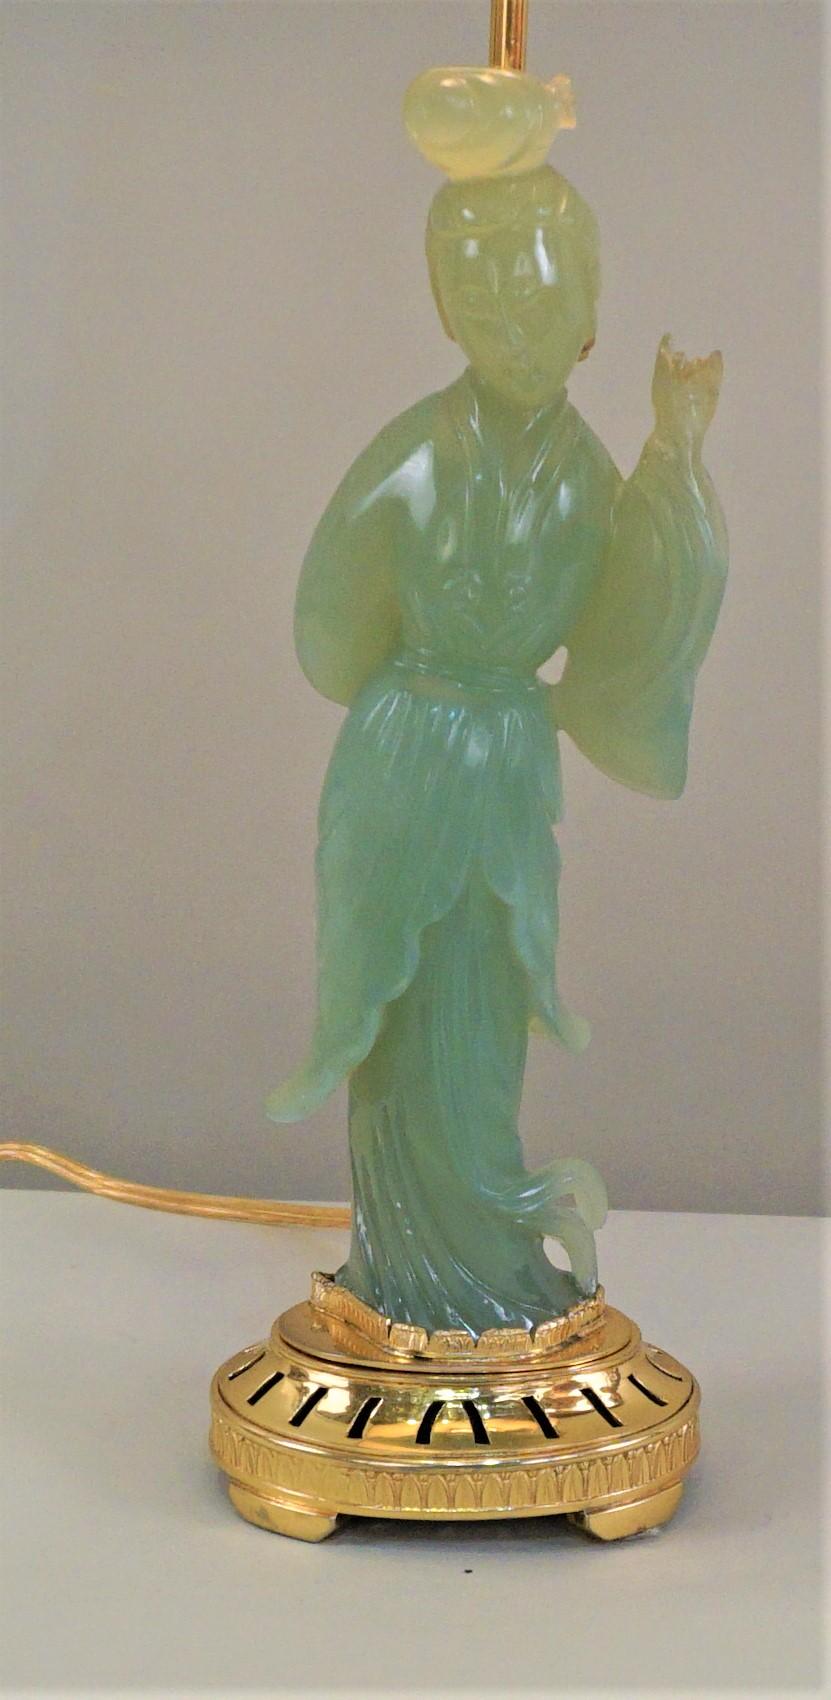 Chinese 1930s carved jade sitting on doré bronze base table lamp.
Chinese jade import to Europe fitted with bronze base in France.
This lamp is fitted with silk lampshade.